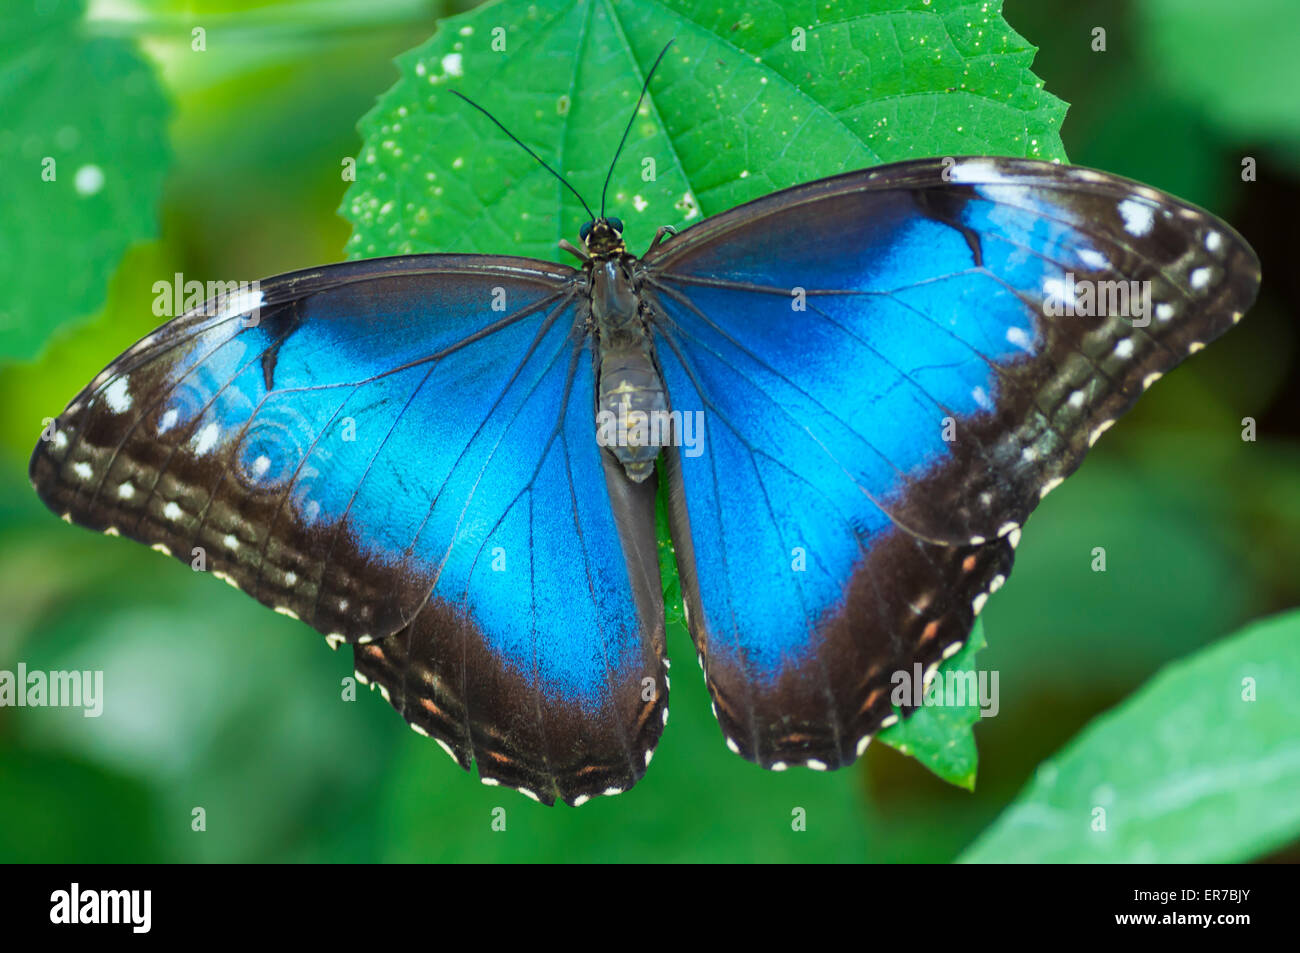 Morpho peleides butterfly, resting on a leaf. Taken on August 30, 2014 at The Bufferfly Arc, Montegrotto Terme, Padova, Italy. Stock Photo